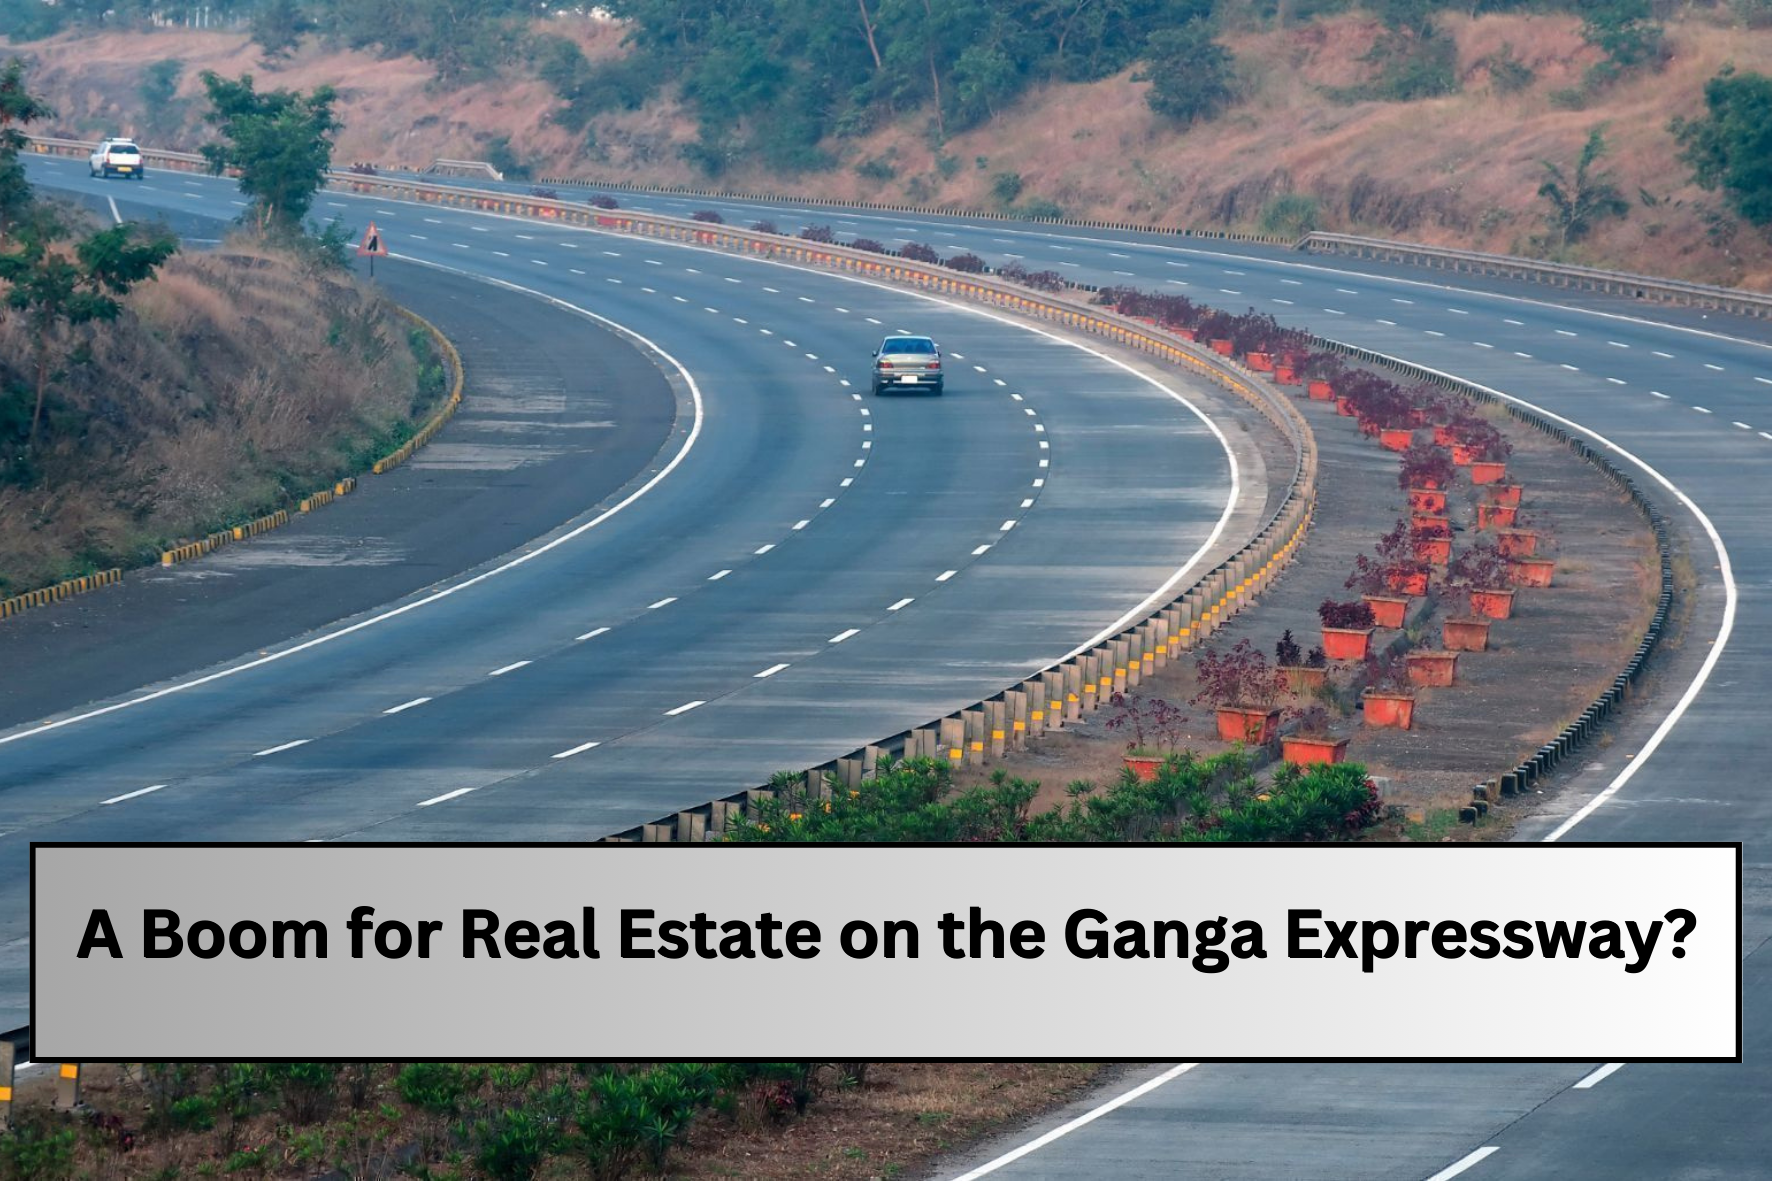 uploads/blog/A_Boom_for_Real_Estate_on_the_Ganga_Expressway.png